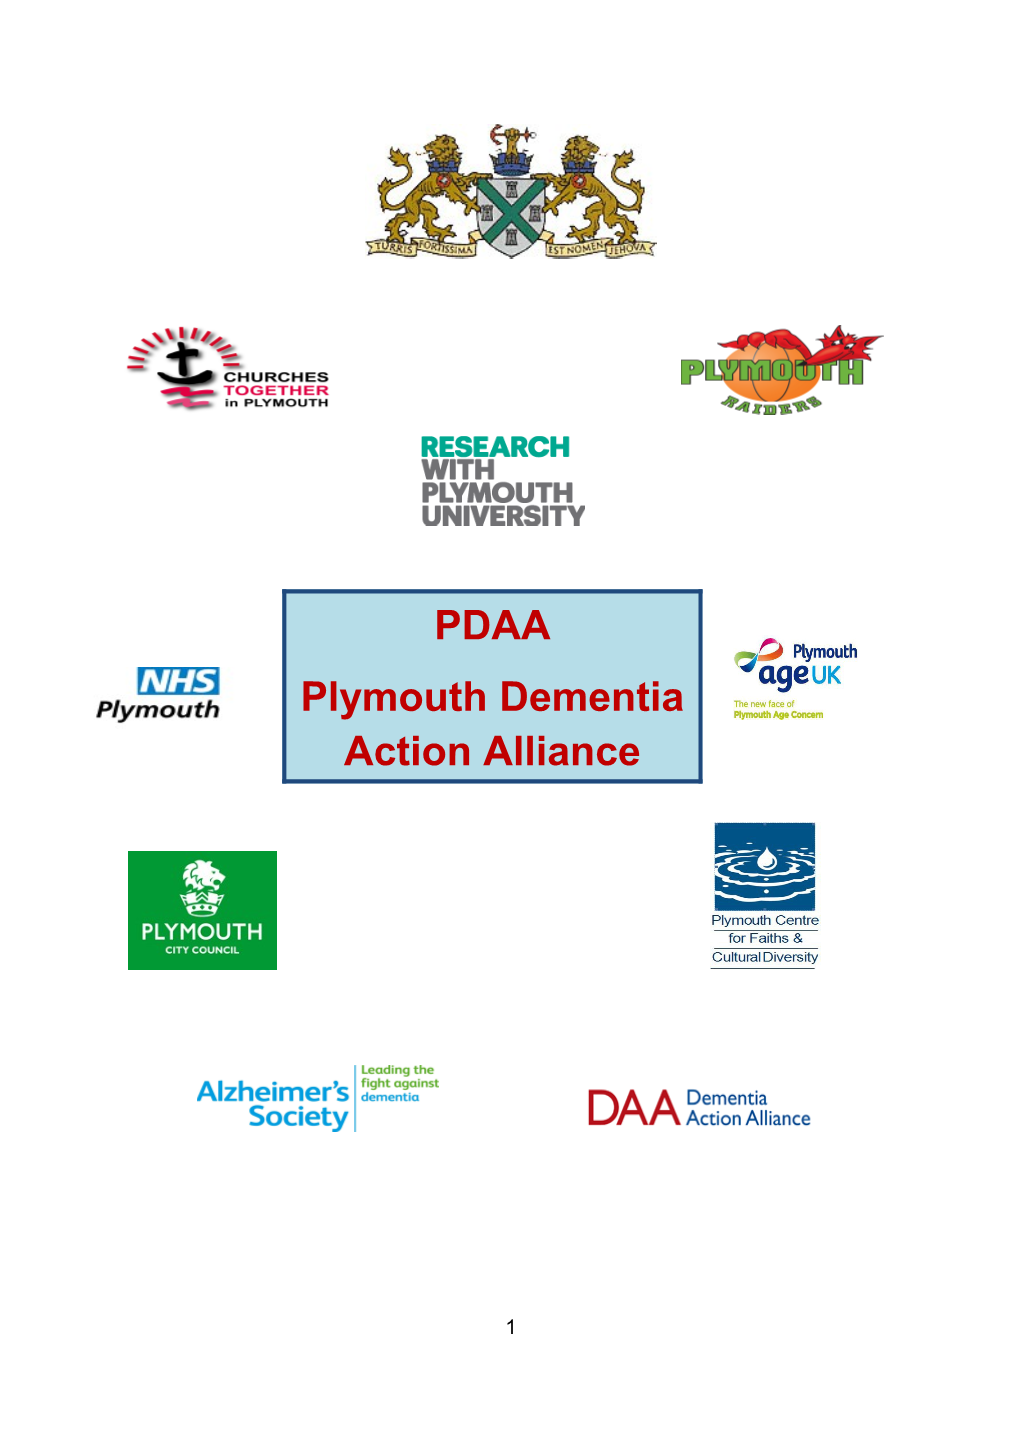 For Plymouth to Become a Dementia Friendly City